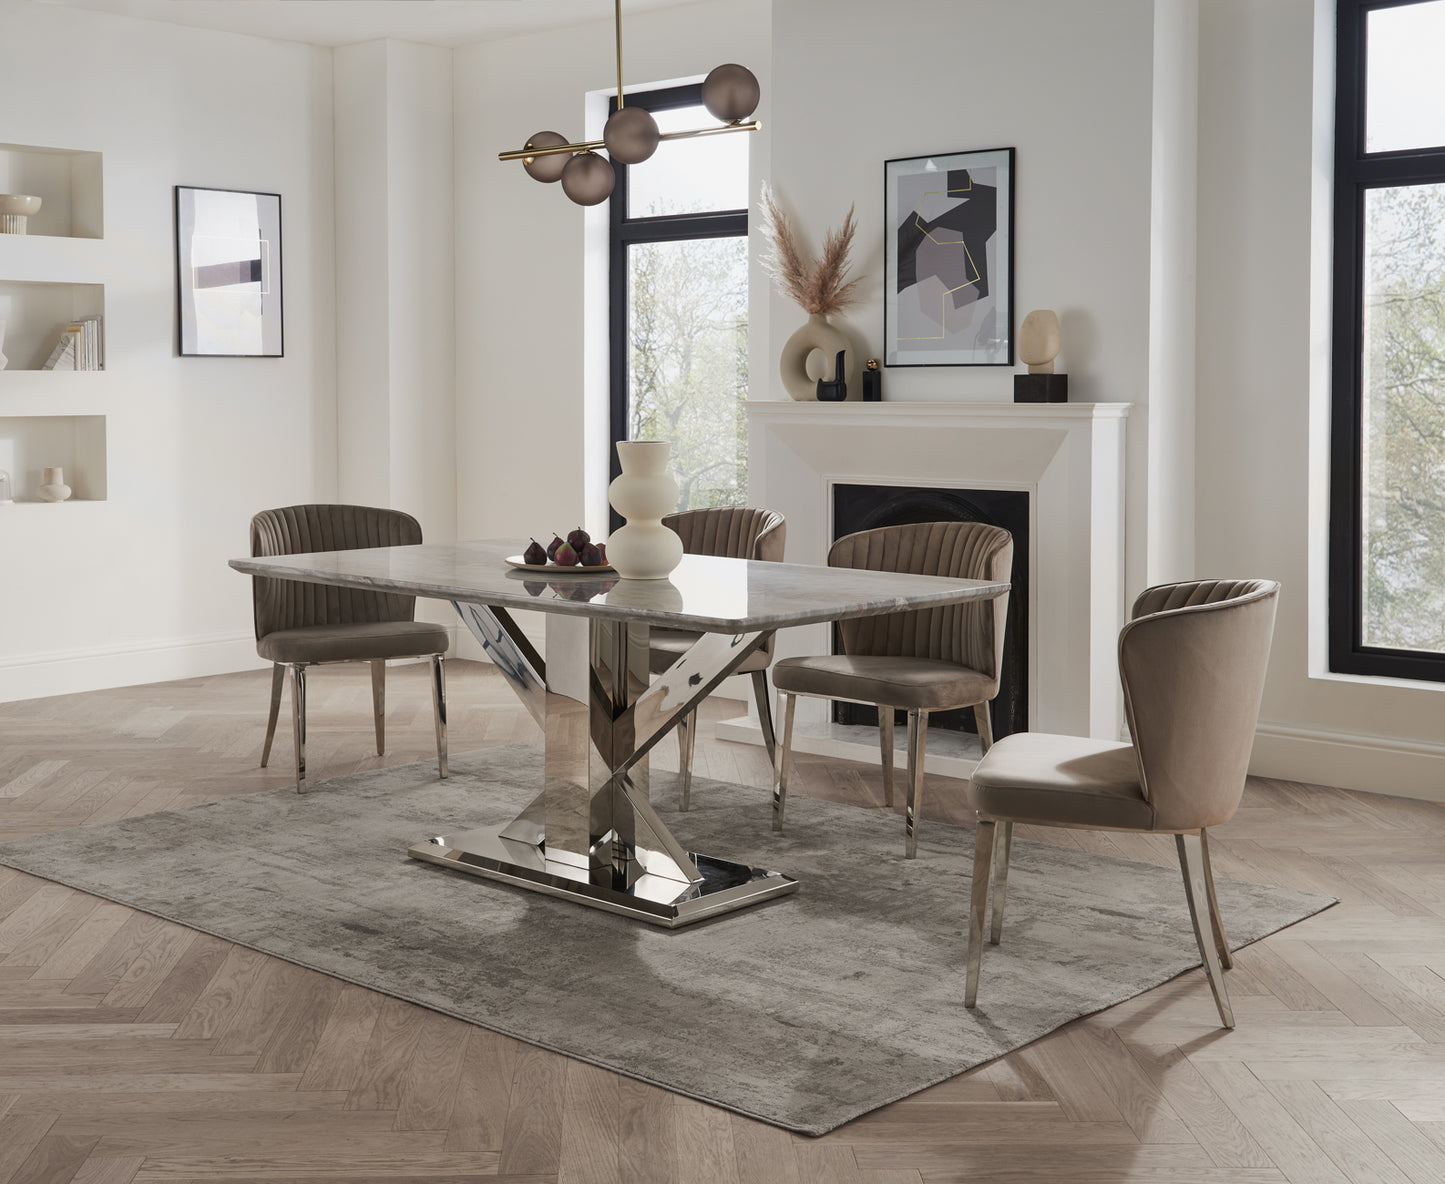 Treviso 1.8m Dining Table | Clearance